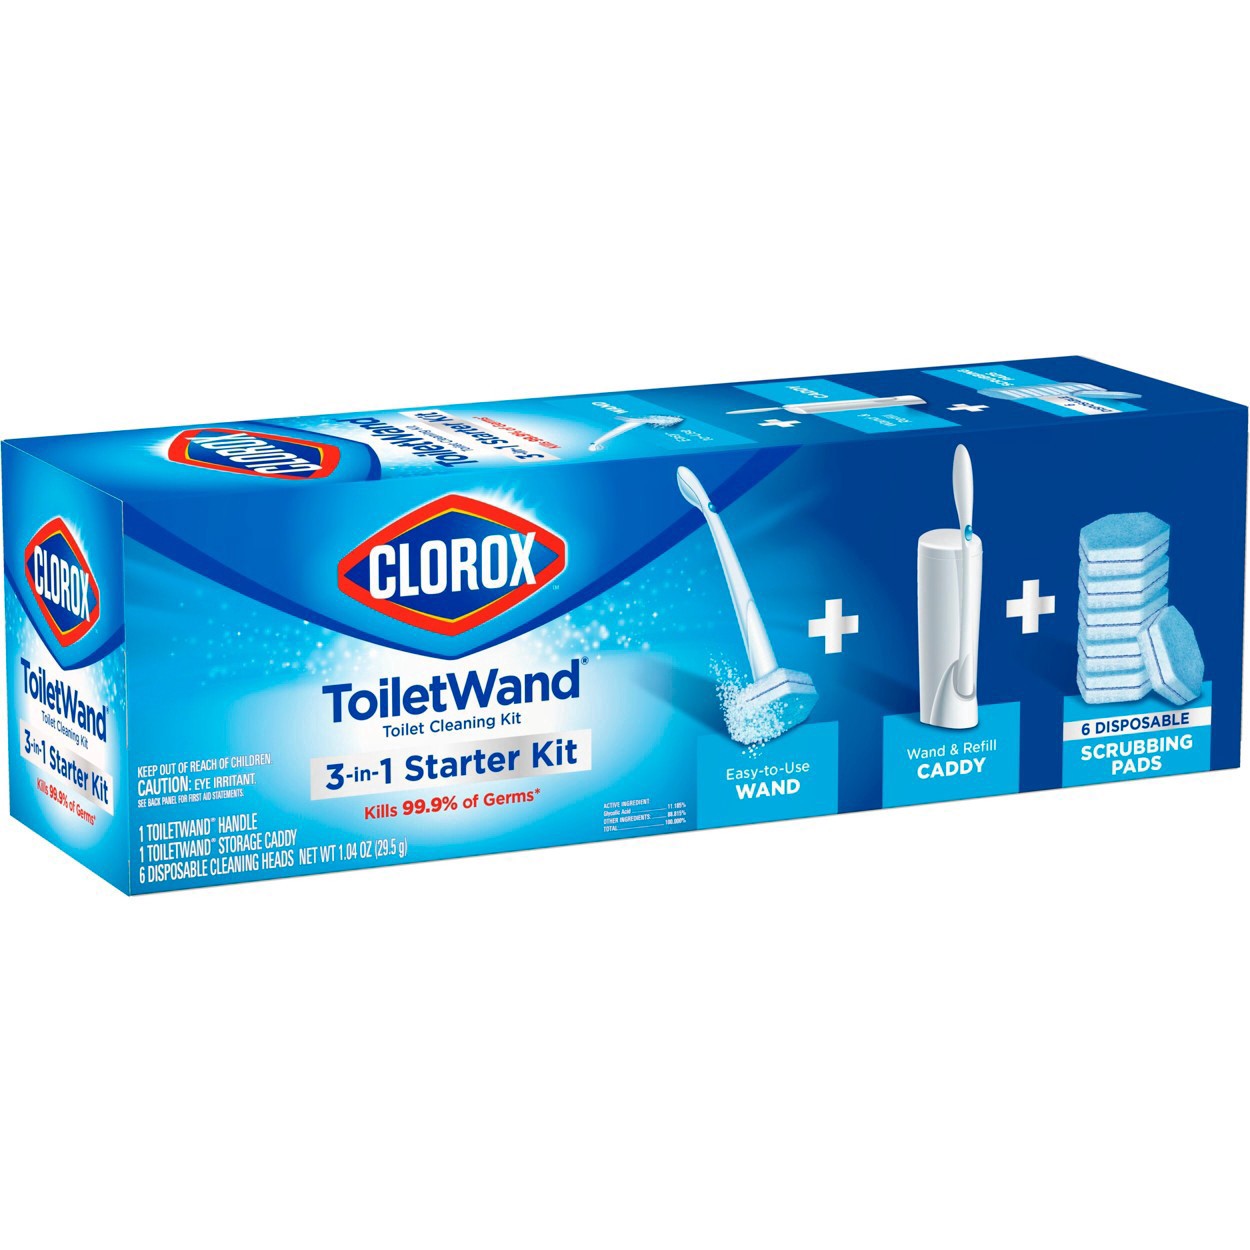 slide 19 of 176, Clorox Toilet Wand 3-in-1 Starter Toliet Cleaning Kit, 1 ct